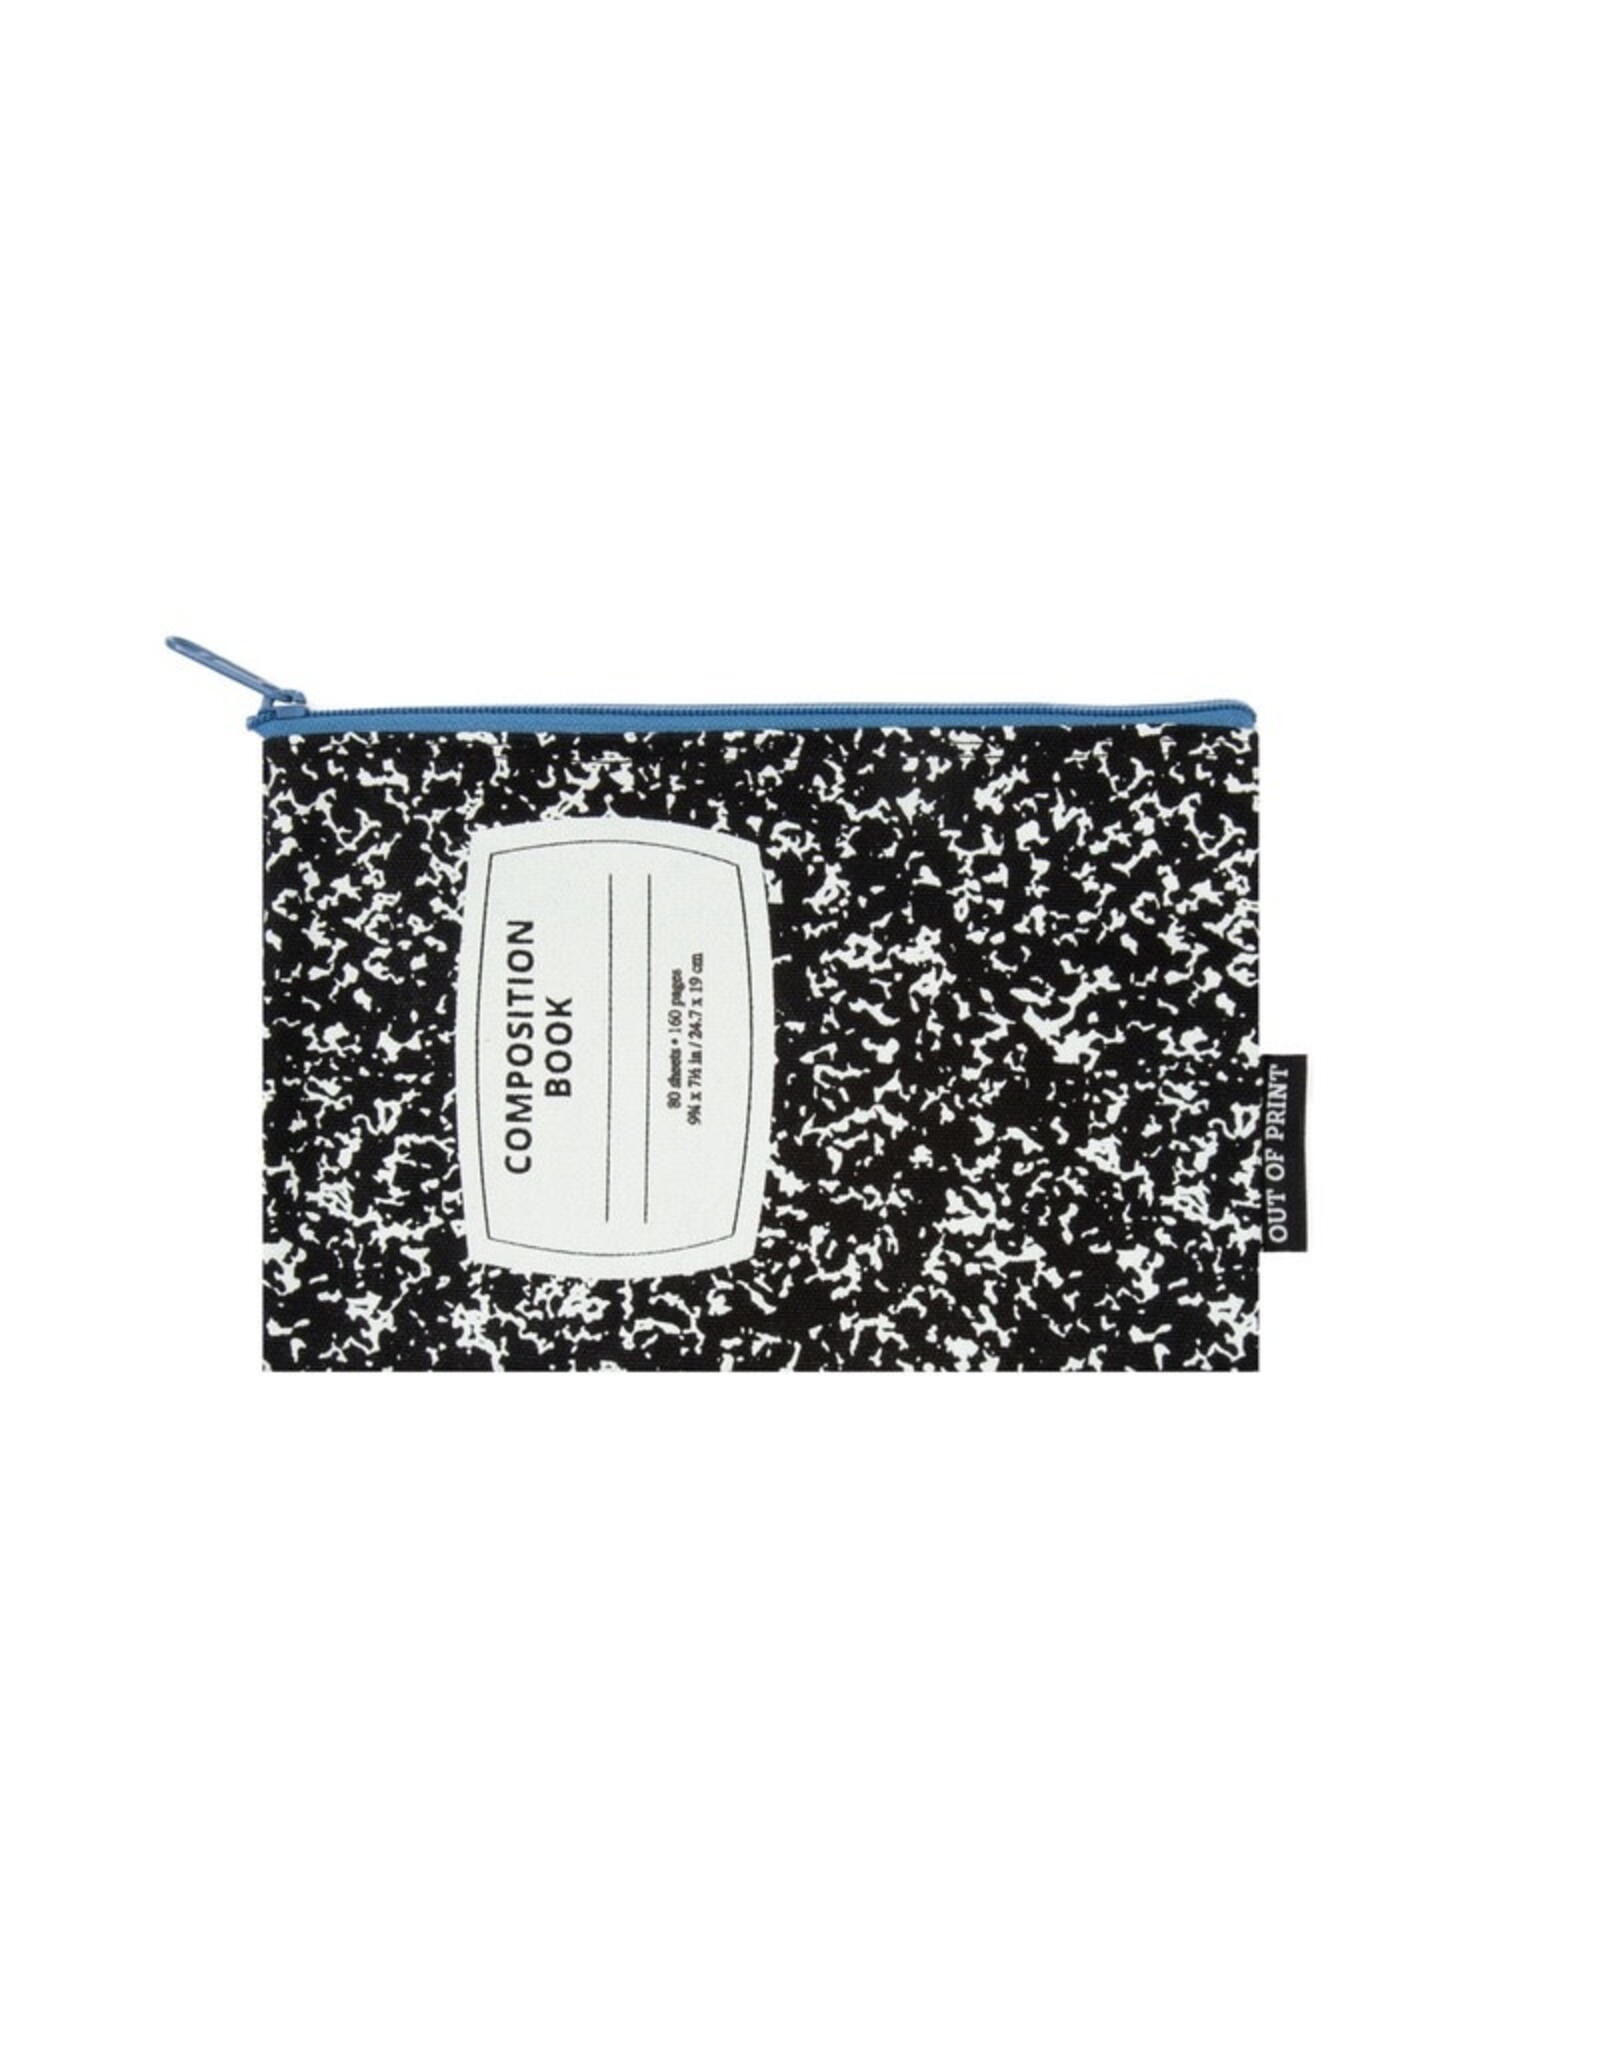 BGS PSE - Out of Print - Zipper Pouch / Composition Notebook